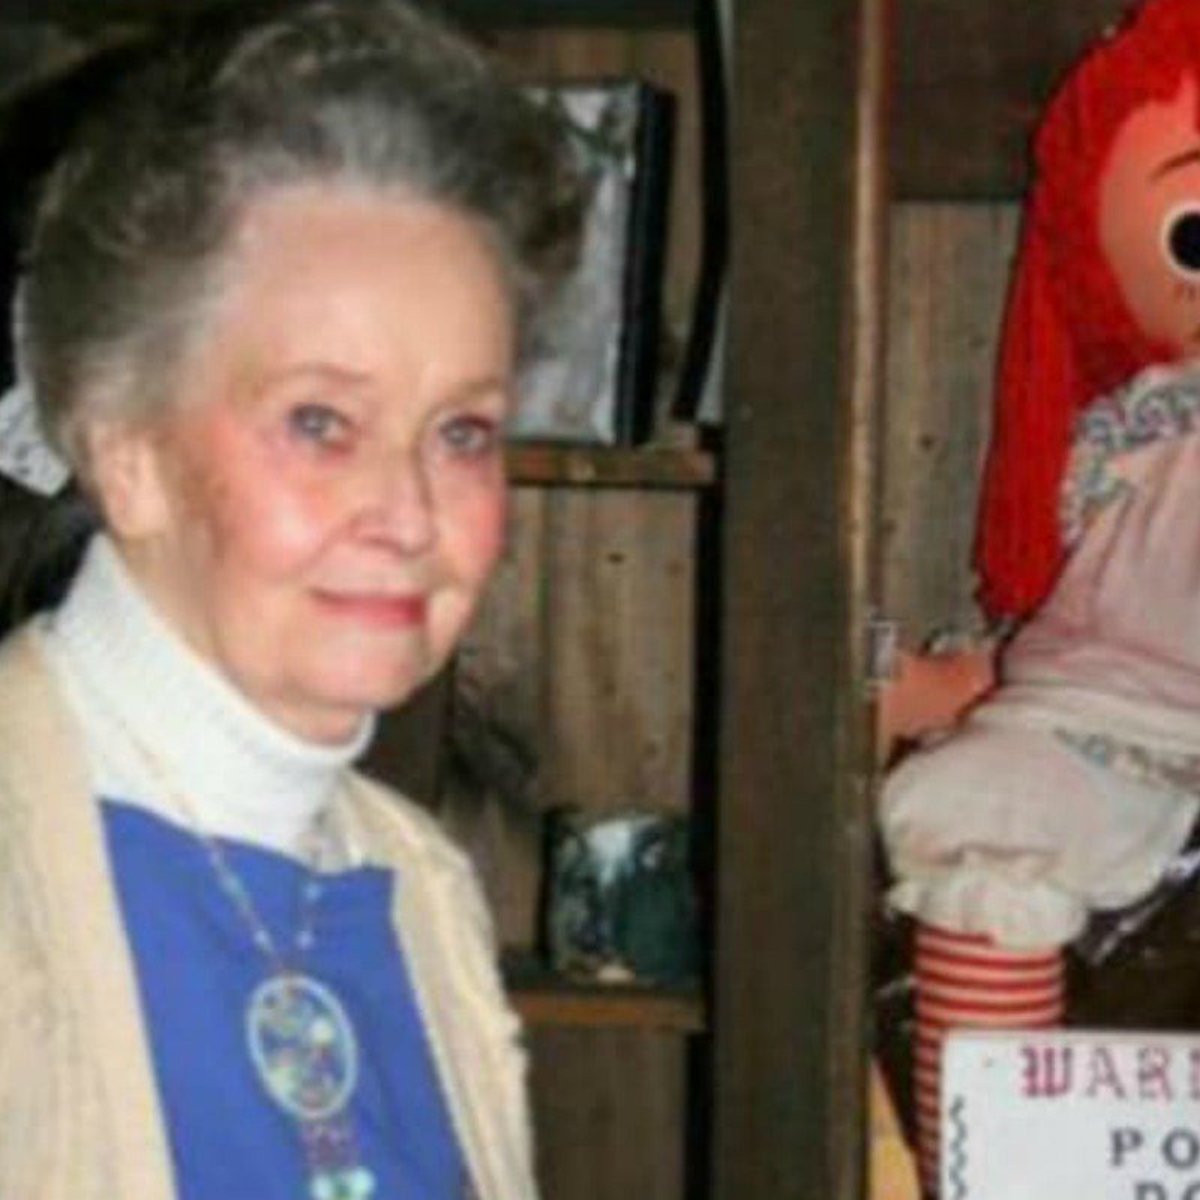 Real Annabelle doll: The true story behind 'Annabelle Comes Home'.